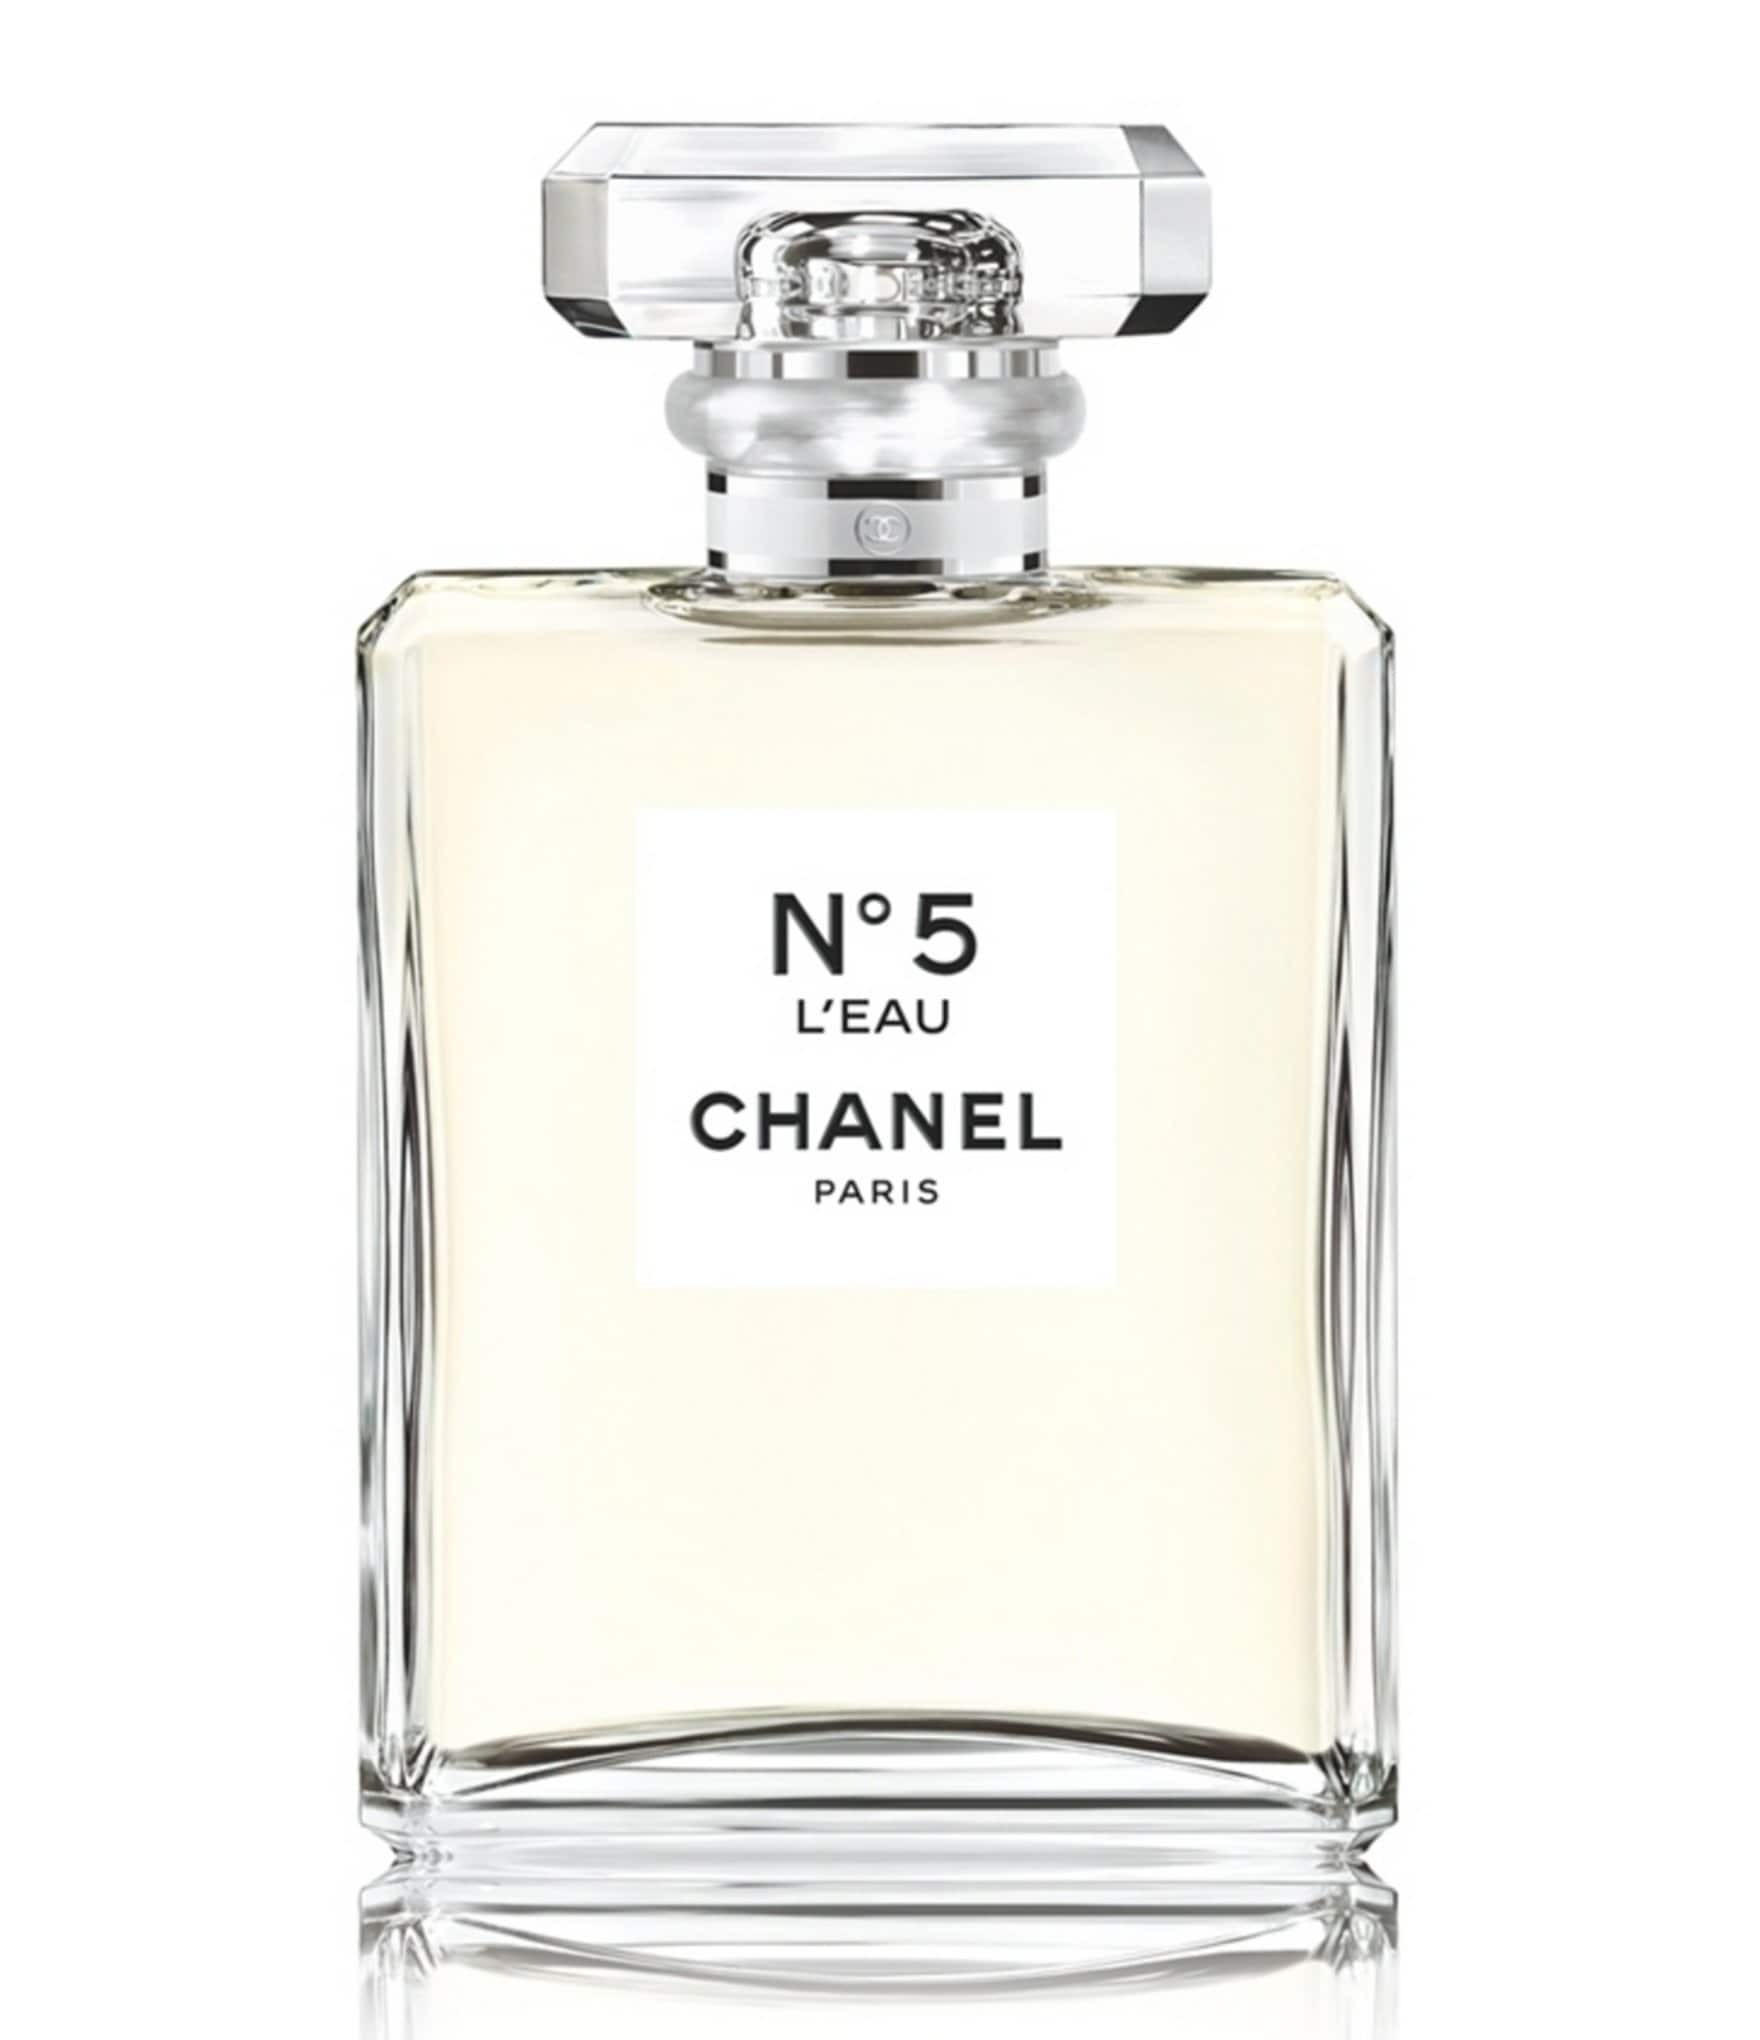 chanel no 19 for men